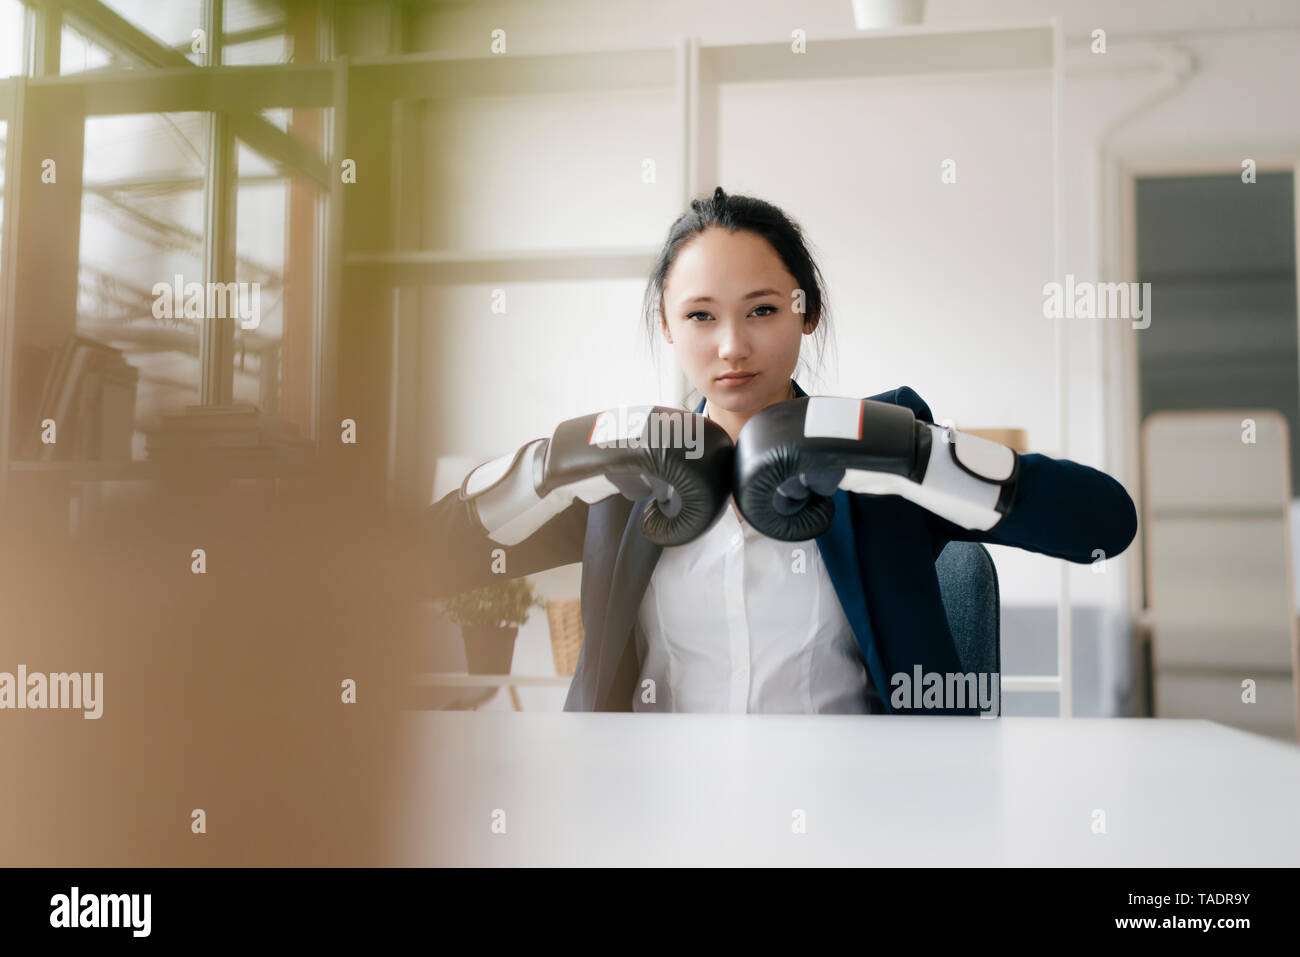 Portrait of young businesswoman sitting at desk wearing boxing gloves Stock Photo